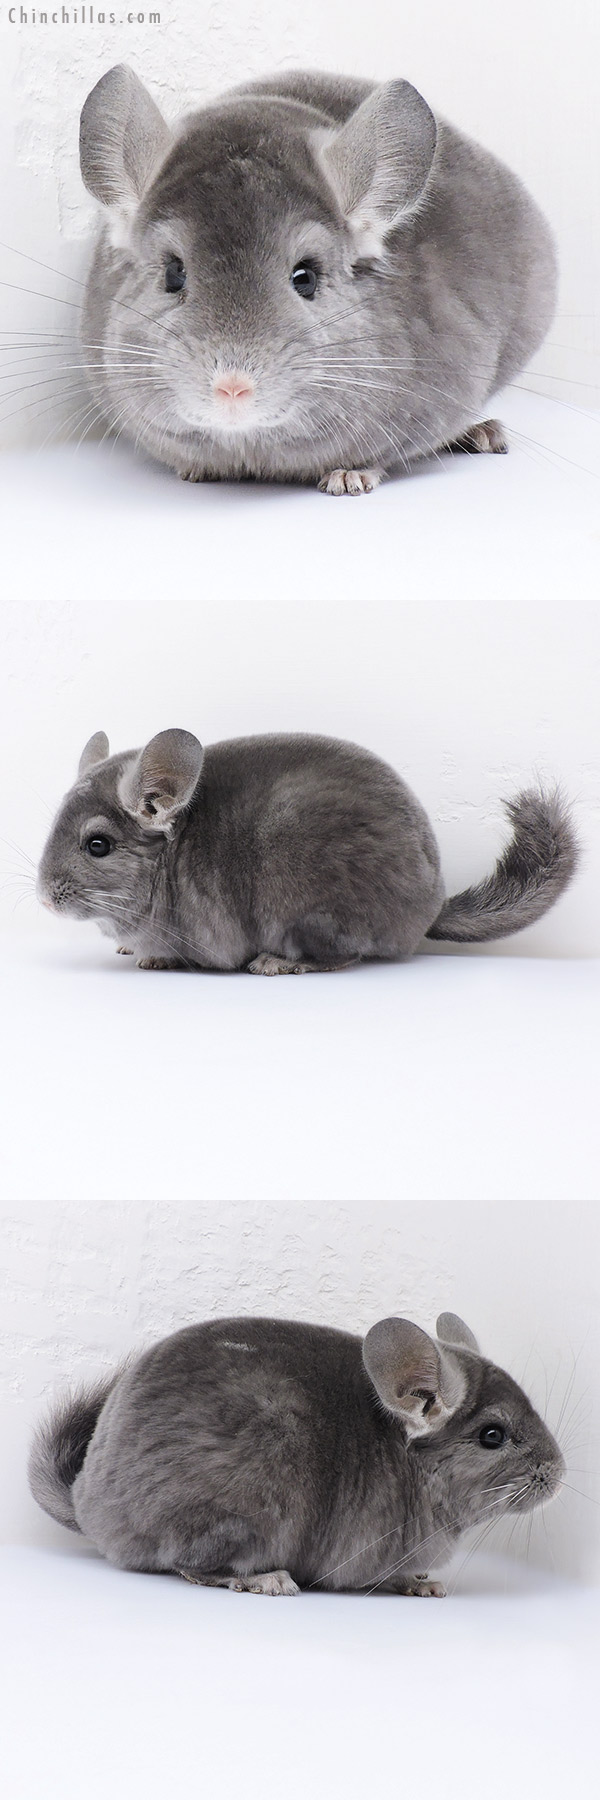 16351 Top Show Quality Wrap Around Violet Male Chinchilla